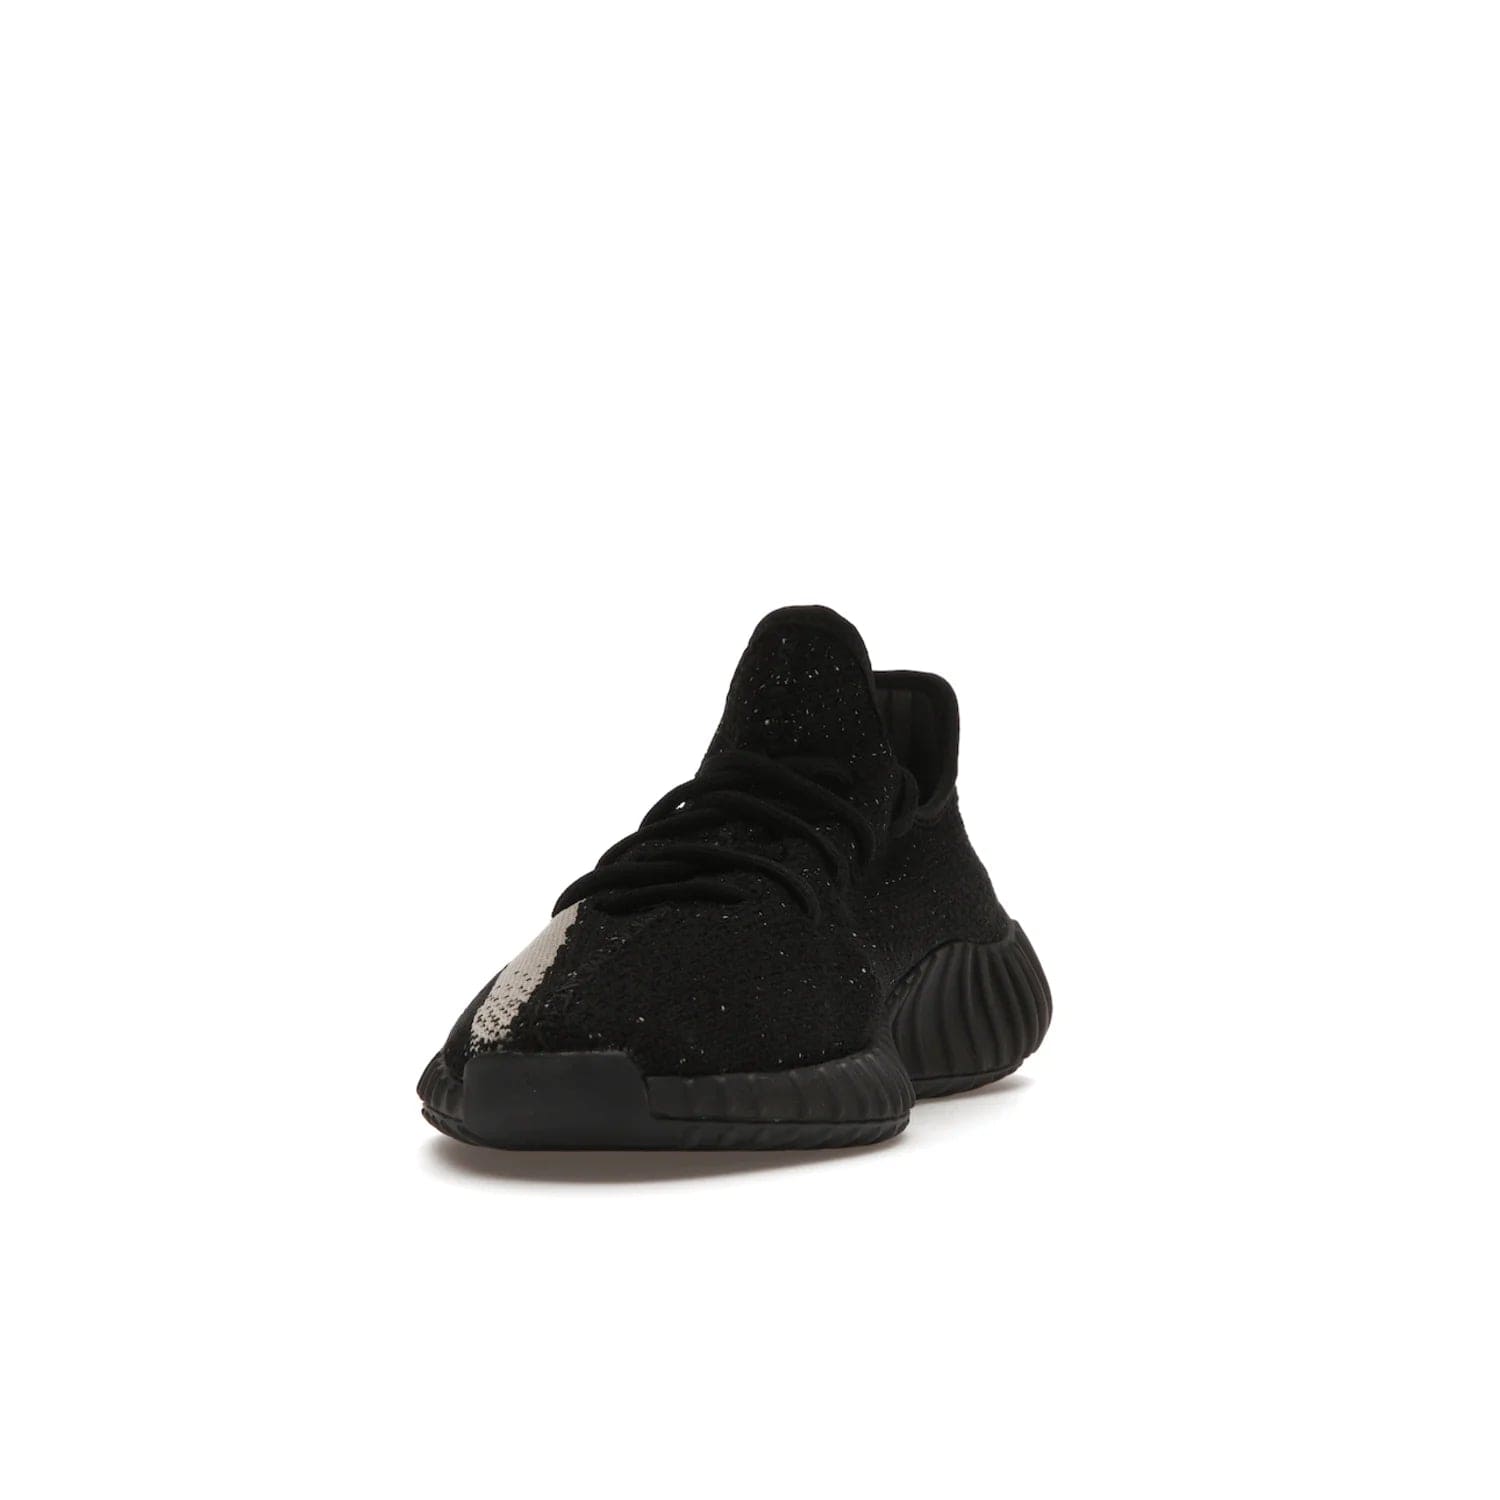 adidas Yeezy Boost 350 V2 Core Black White (2016/2022) - Image 12 - Only at www.BallersClubKickz.com - Stylish adidas Yeezy Boost 350 V2 in classic black with white "SPLY-350" stitched to the side stripe. Features Primeknit upper & Boost sole for comfort. Restock in March 2022.